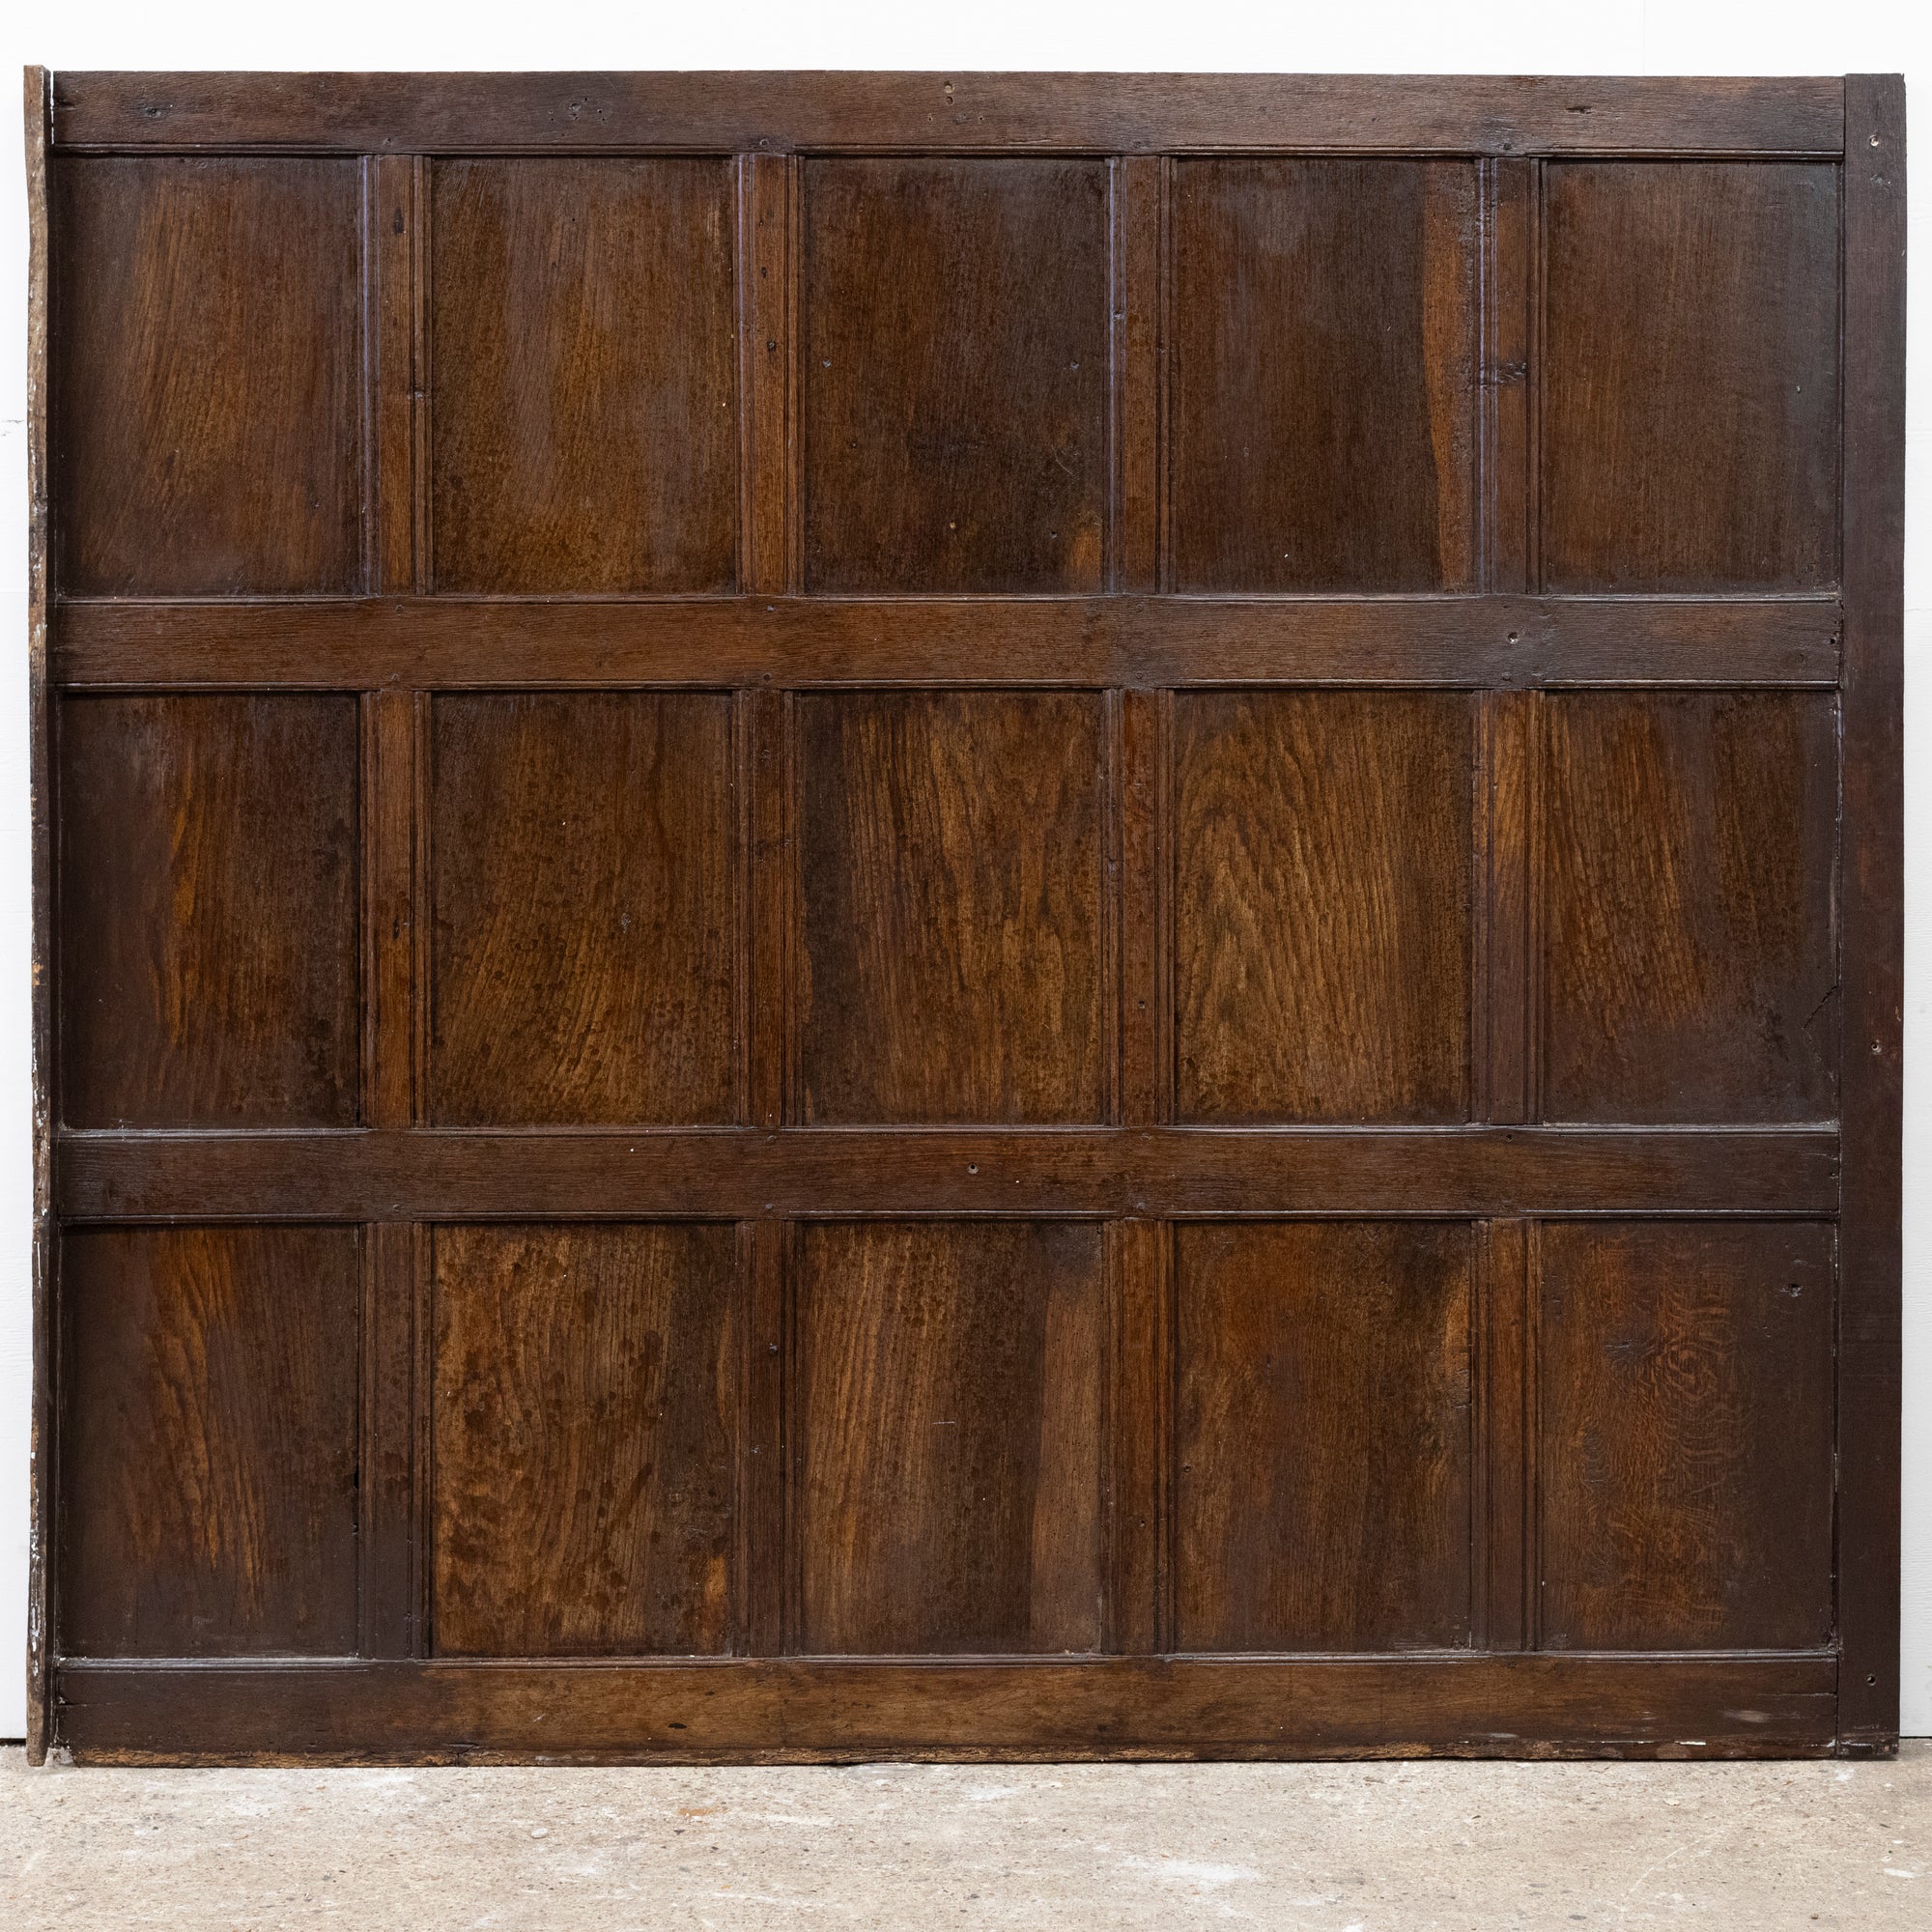 Mid 18th Century Oak Panelling | Collection of Room Panels | The Architectural Forum